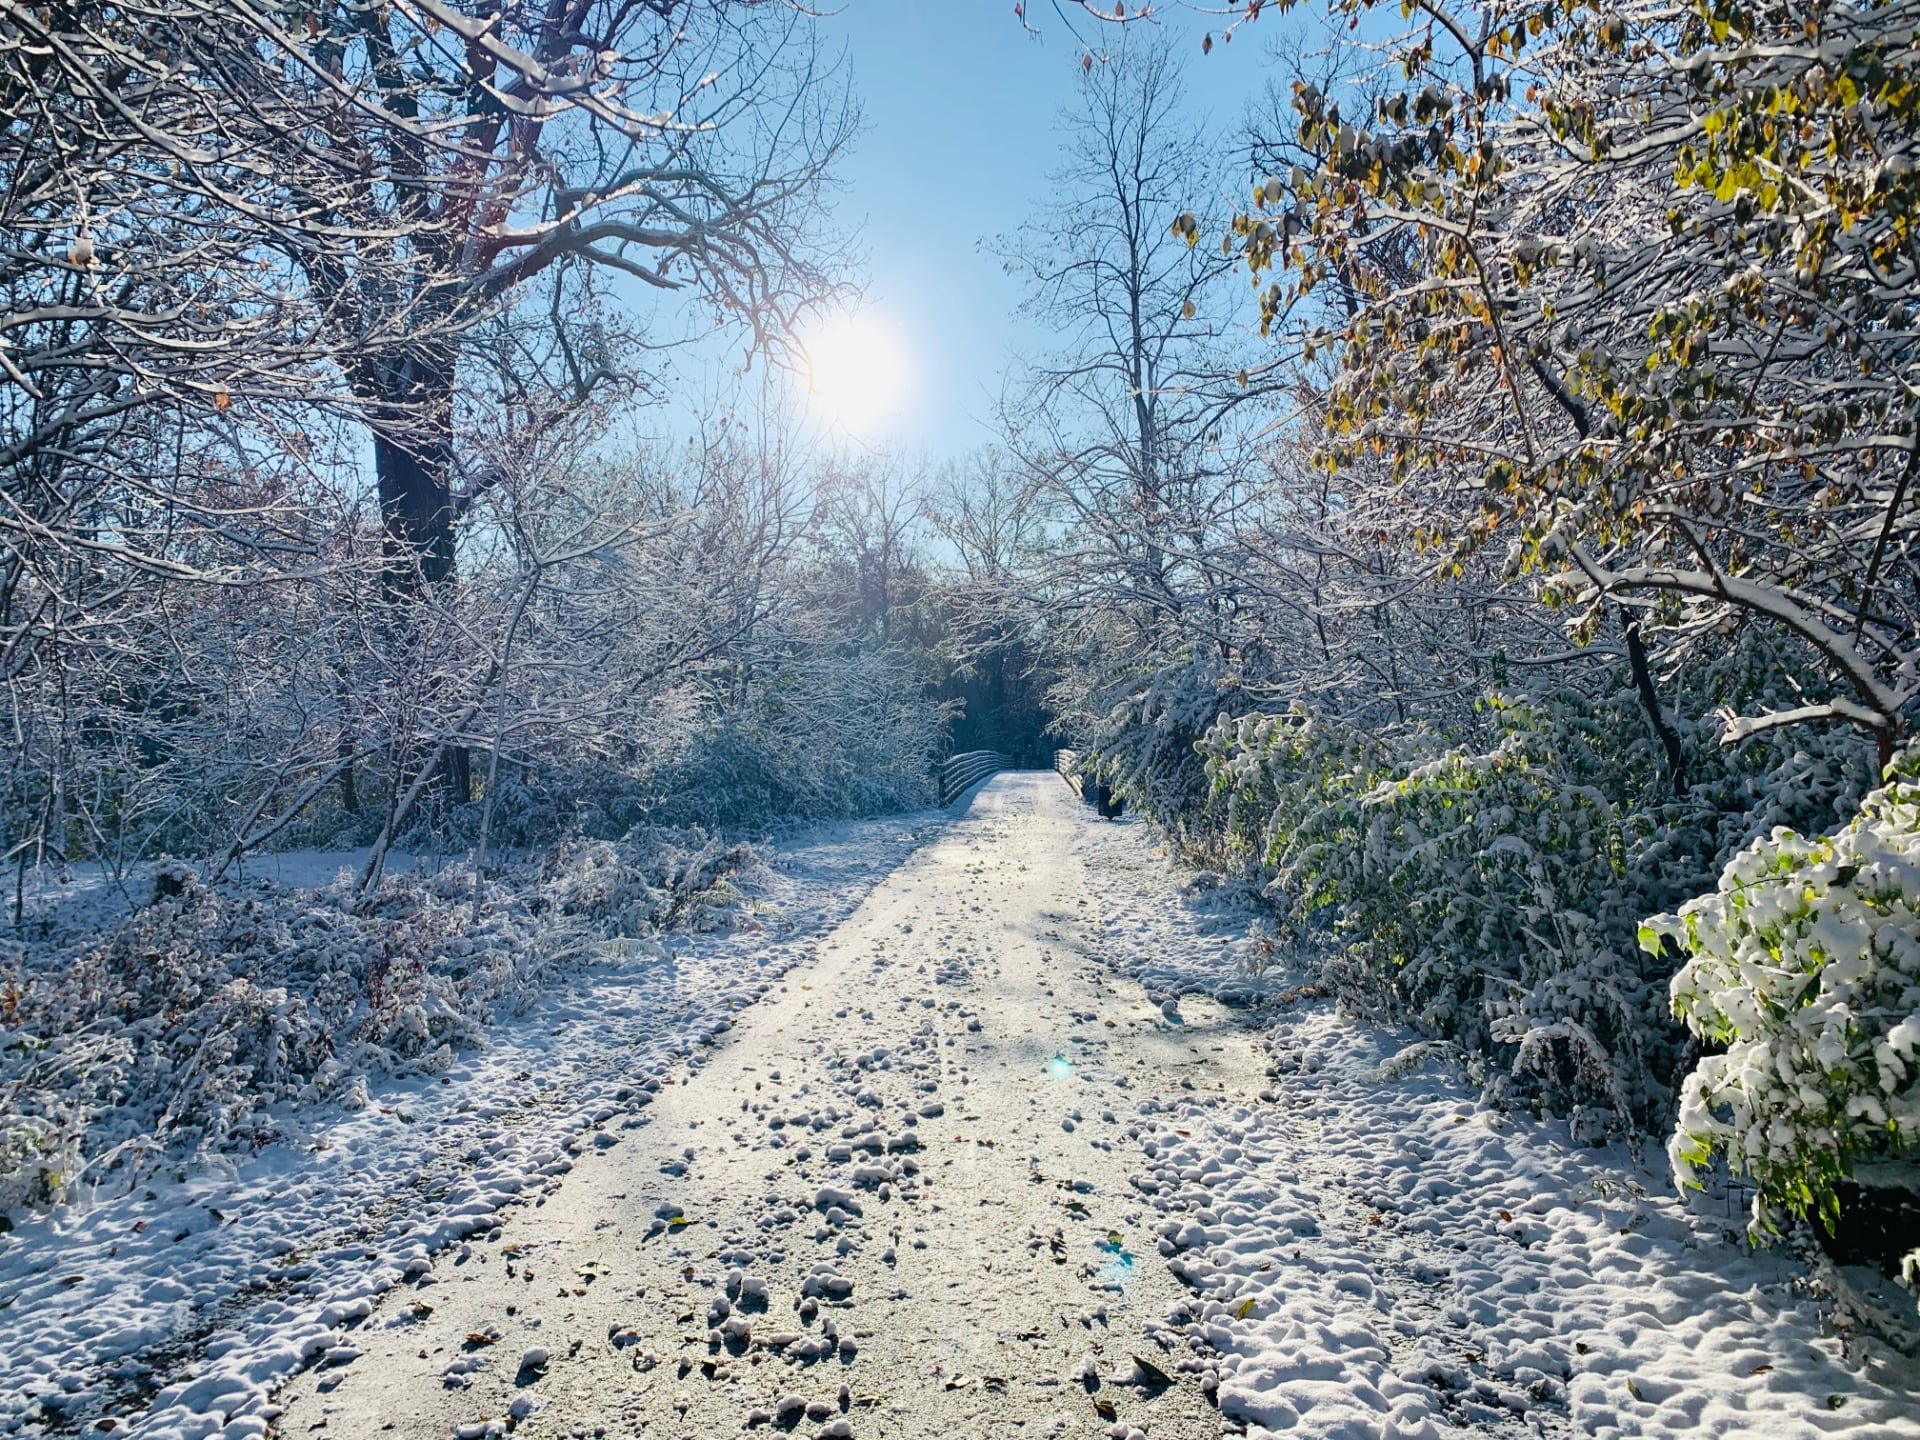 A frozen section of the bike trail with the sun overlooking